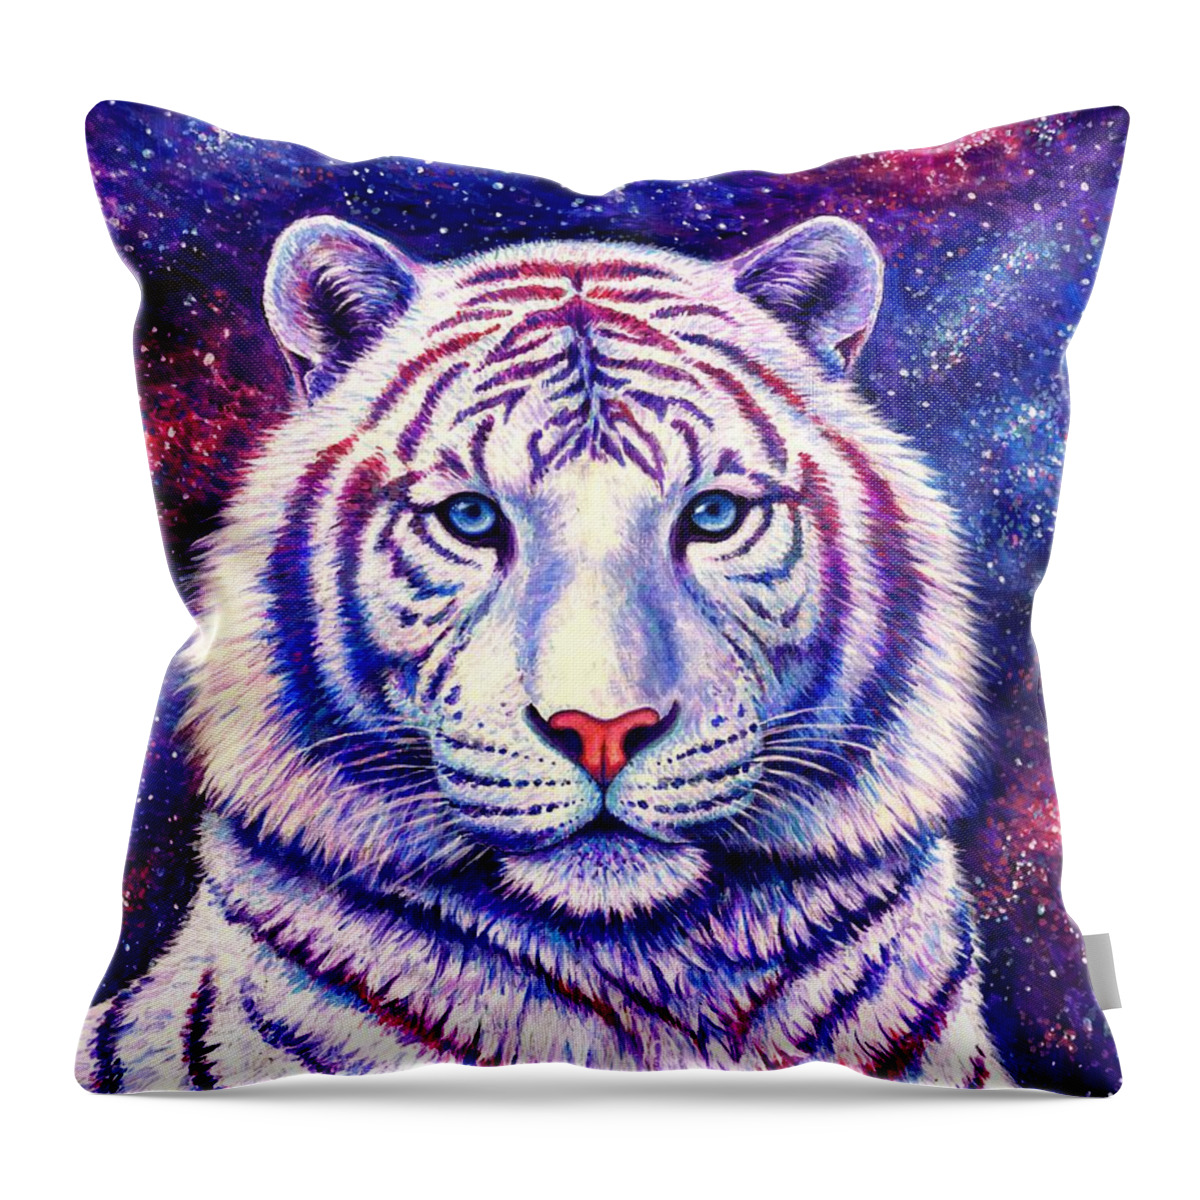 Tiger Throw Pillow featuring the painting Among the Stars - Cosmic White Tiger by Rebecca Wang